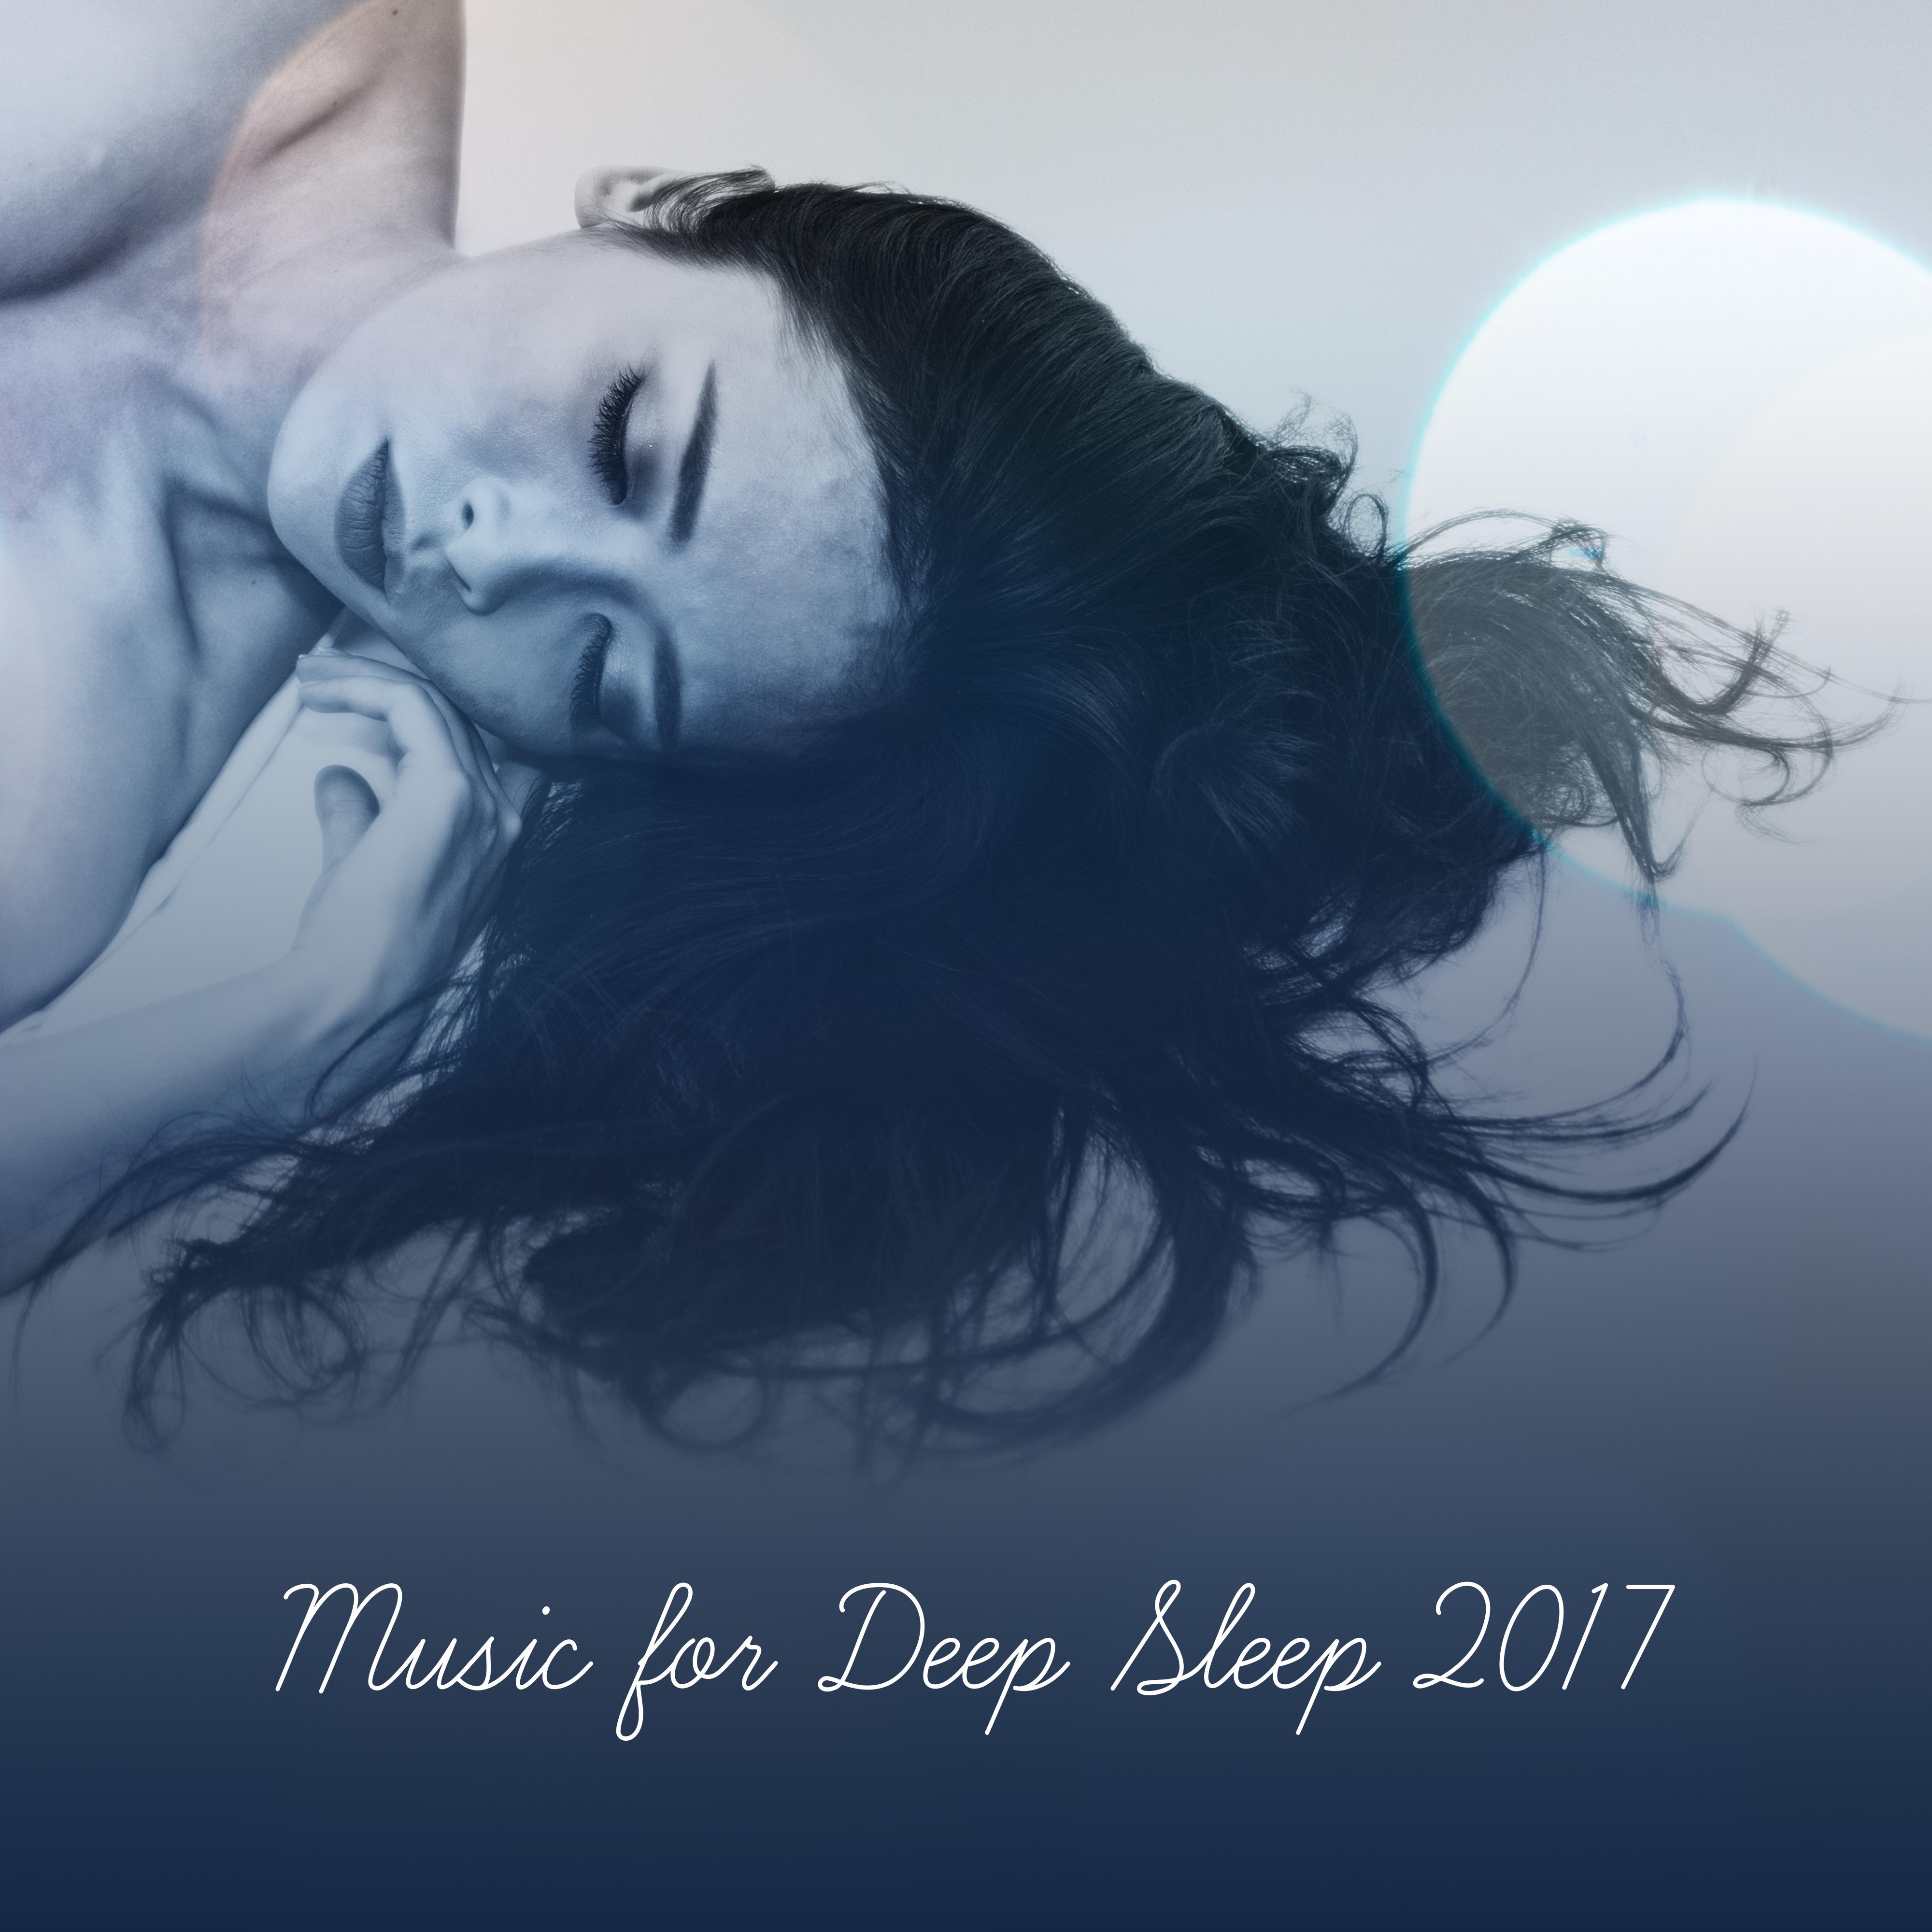 Music for Deep Sleep 2017 – New Relaxing Music for Falling Asleep, Lullabies for Sleep, Pure Relaxation, Calming Nature